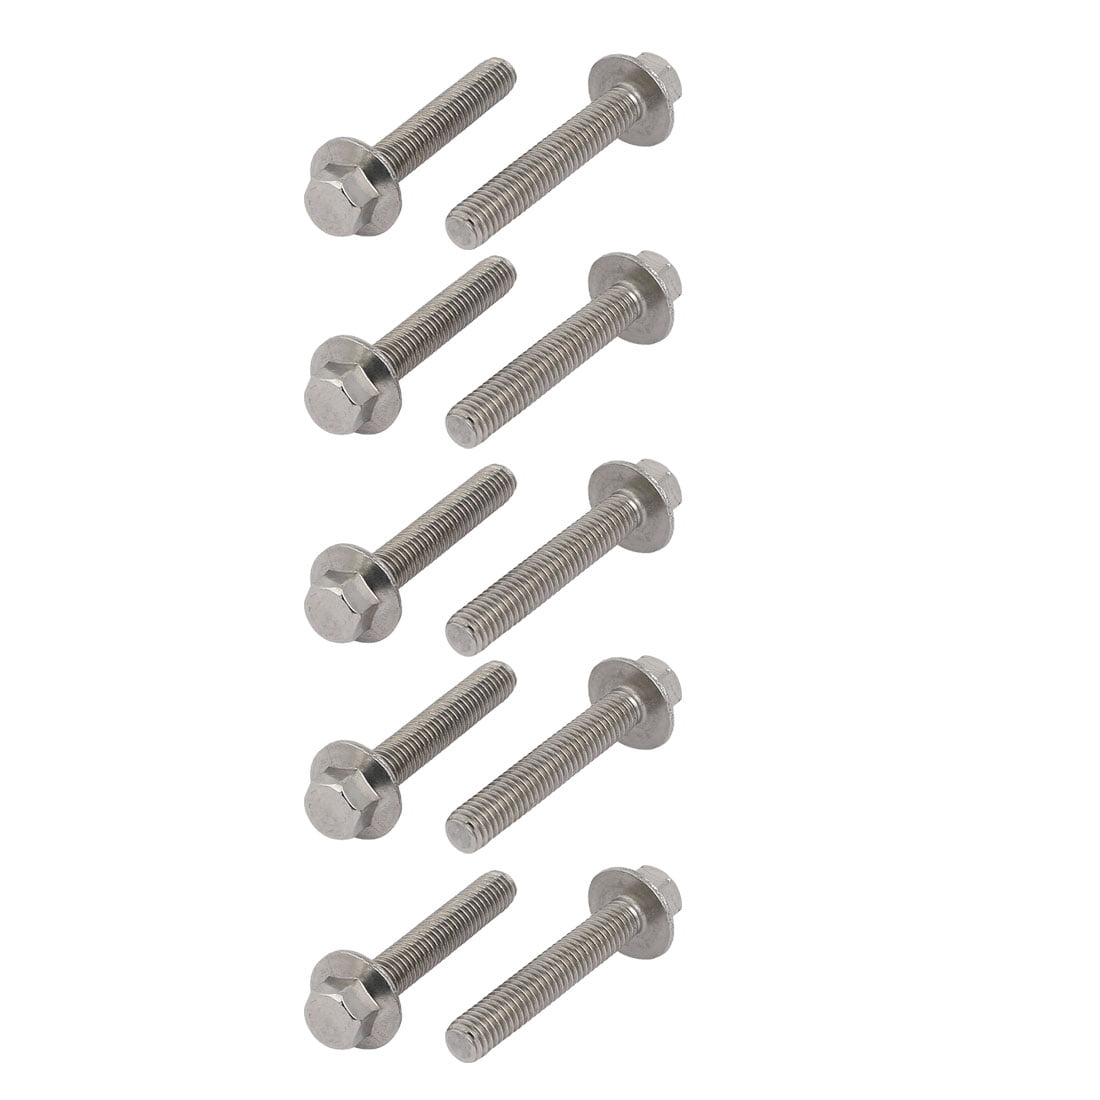 10Pcs M5x55mm Nickel Plated Binding Screw Post for Scrapbook Photo Albums